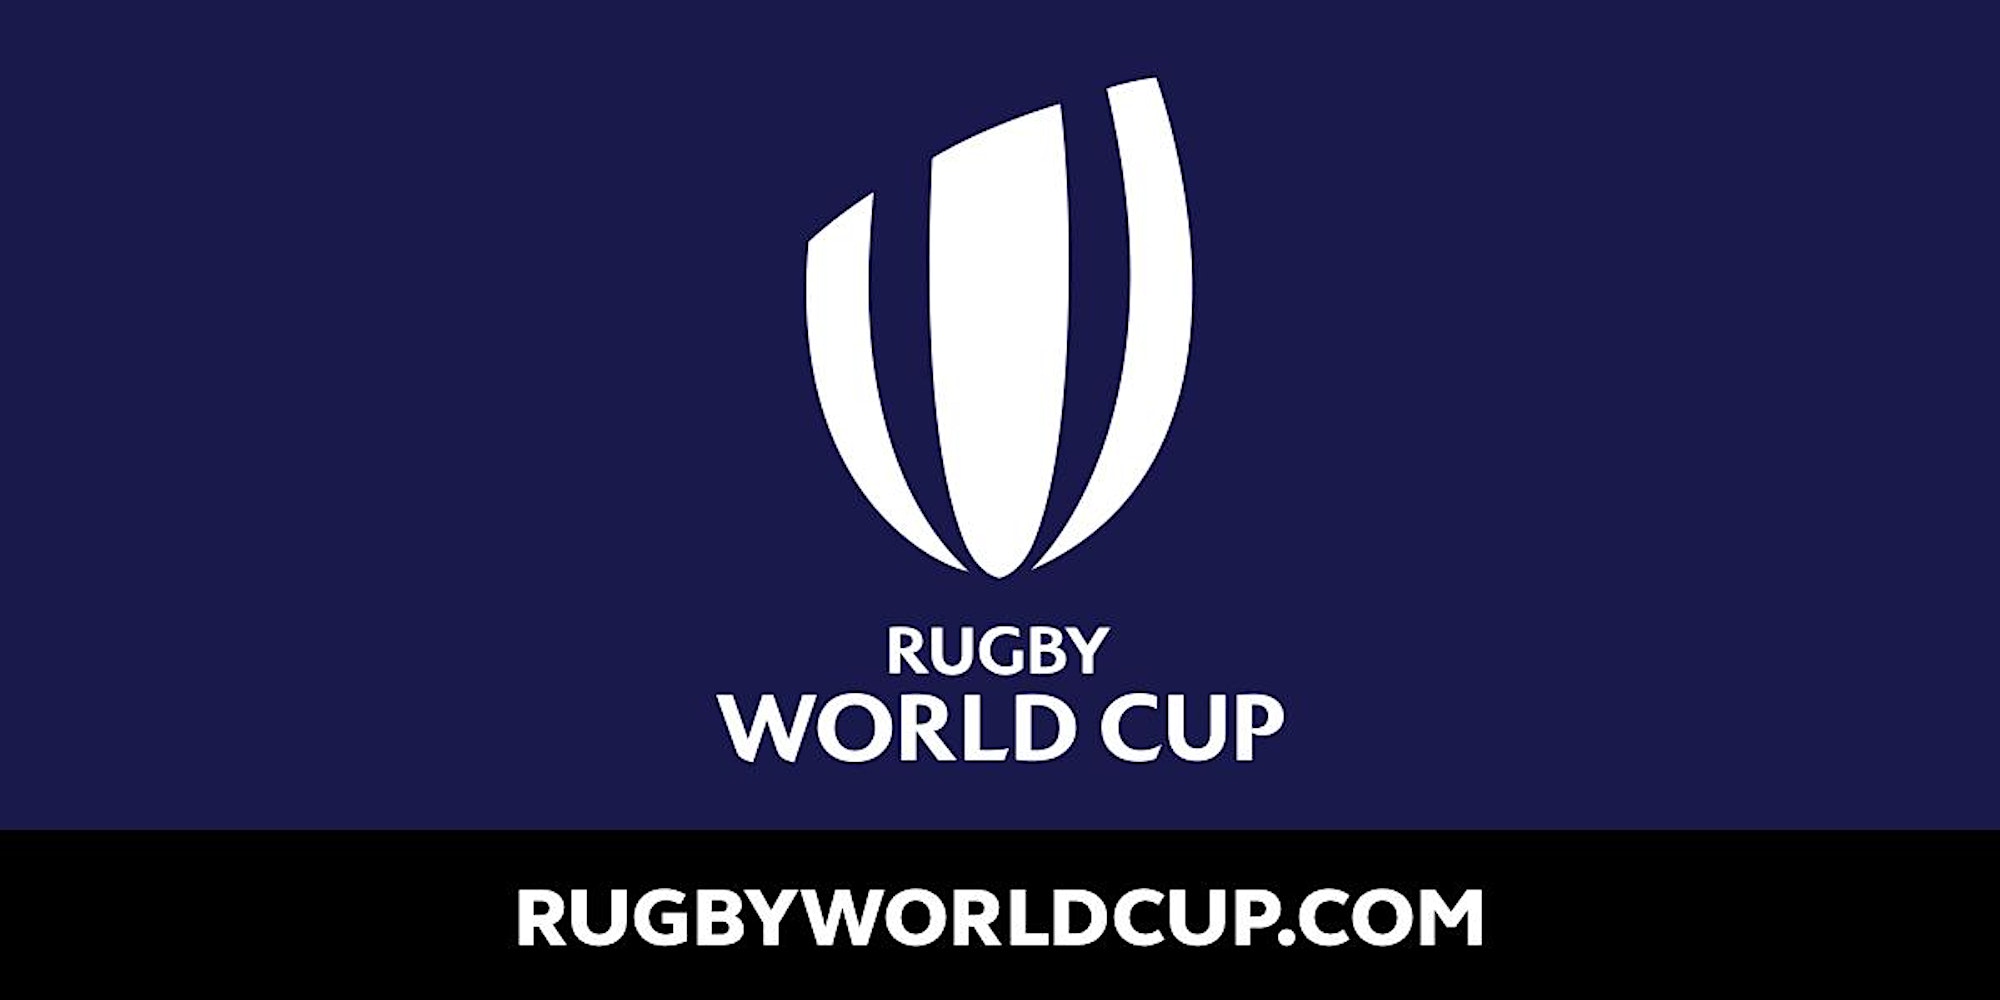 The 2023 Rugby World Cup All matches shown live with sound